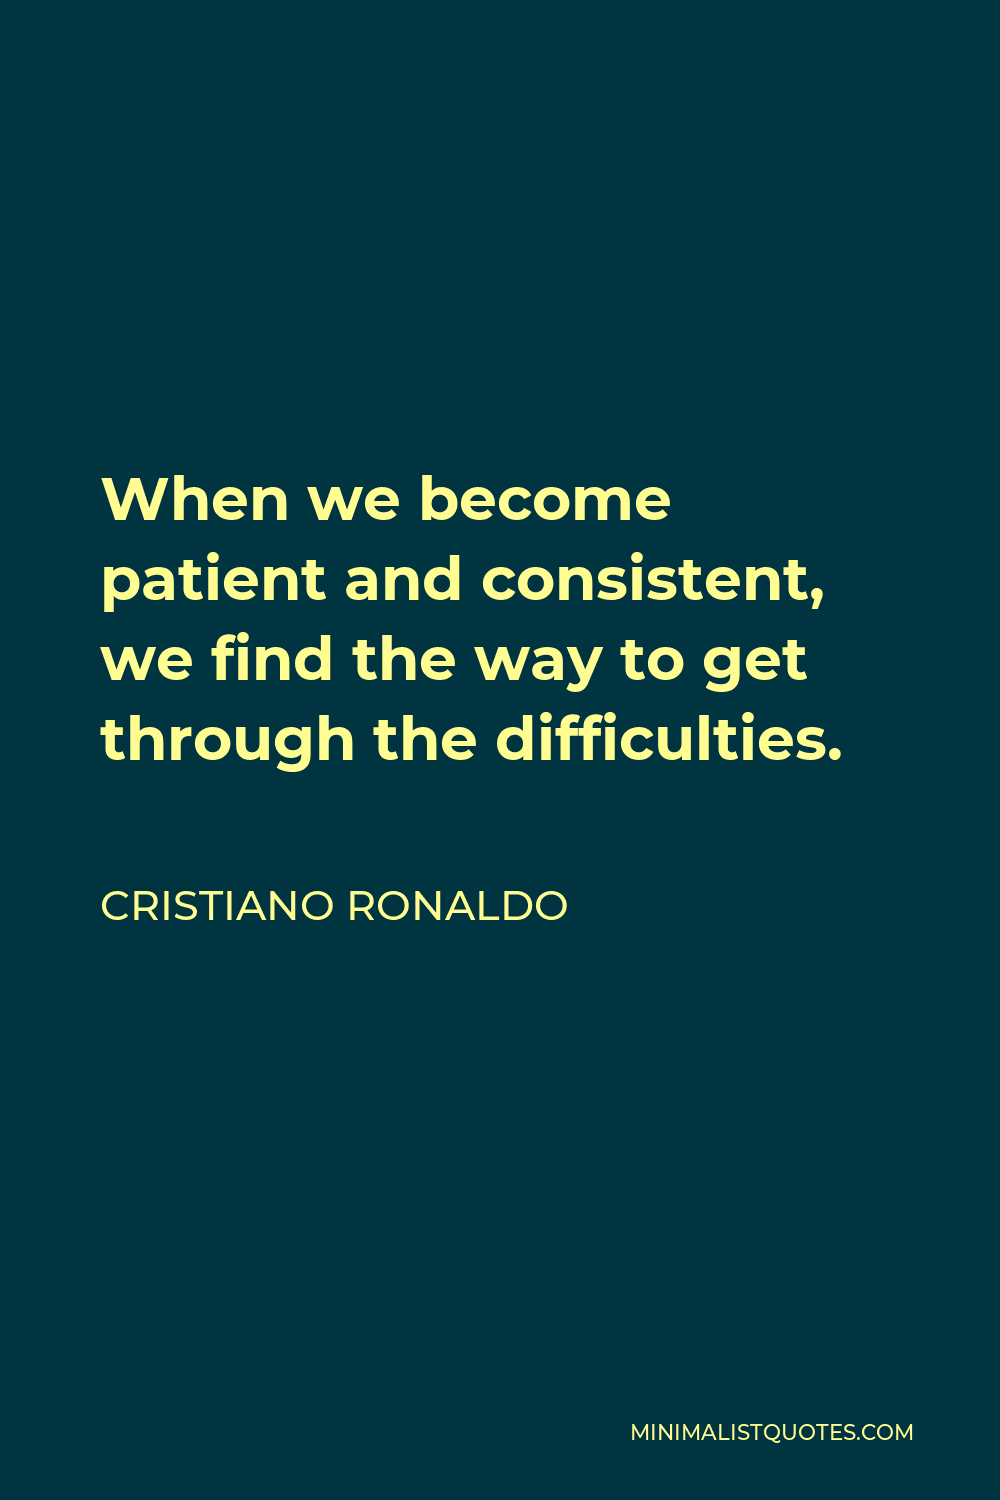 Cristiano Ronaldo Quote - When we become patient and consistent, we find the way to get through the difficulties.